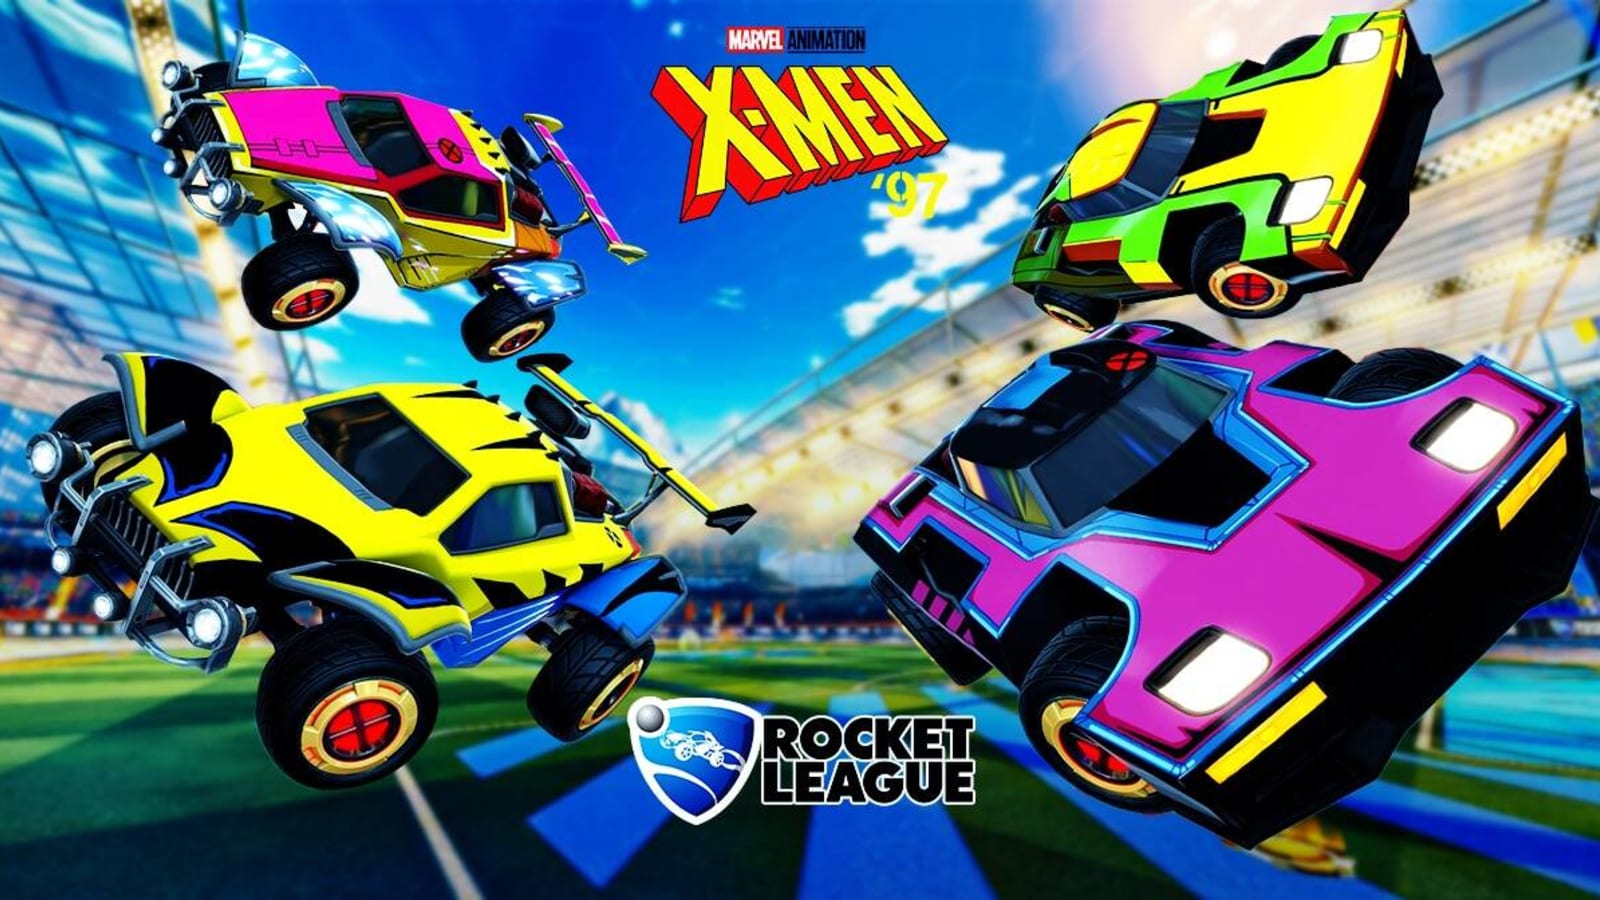 Rocket League and X-Men ’97 Crossover Event Now Live